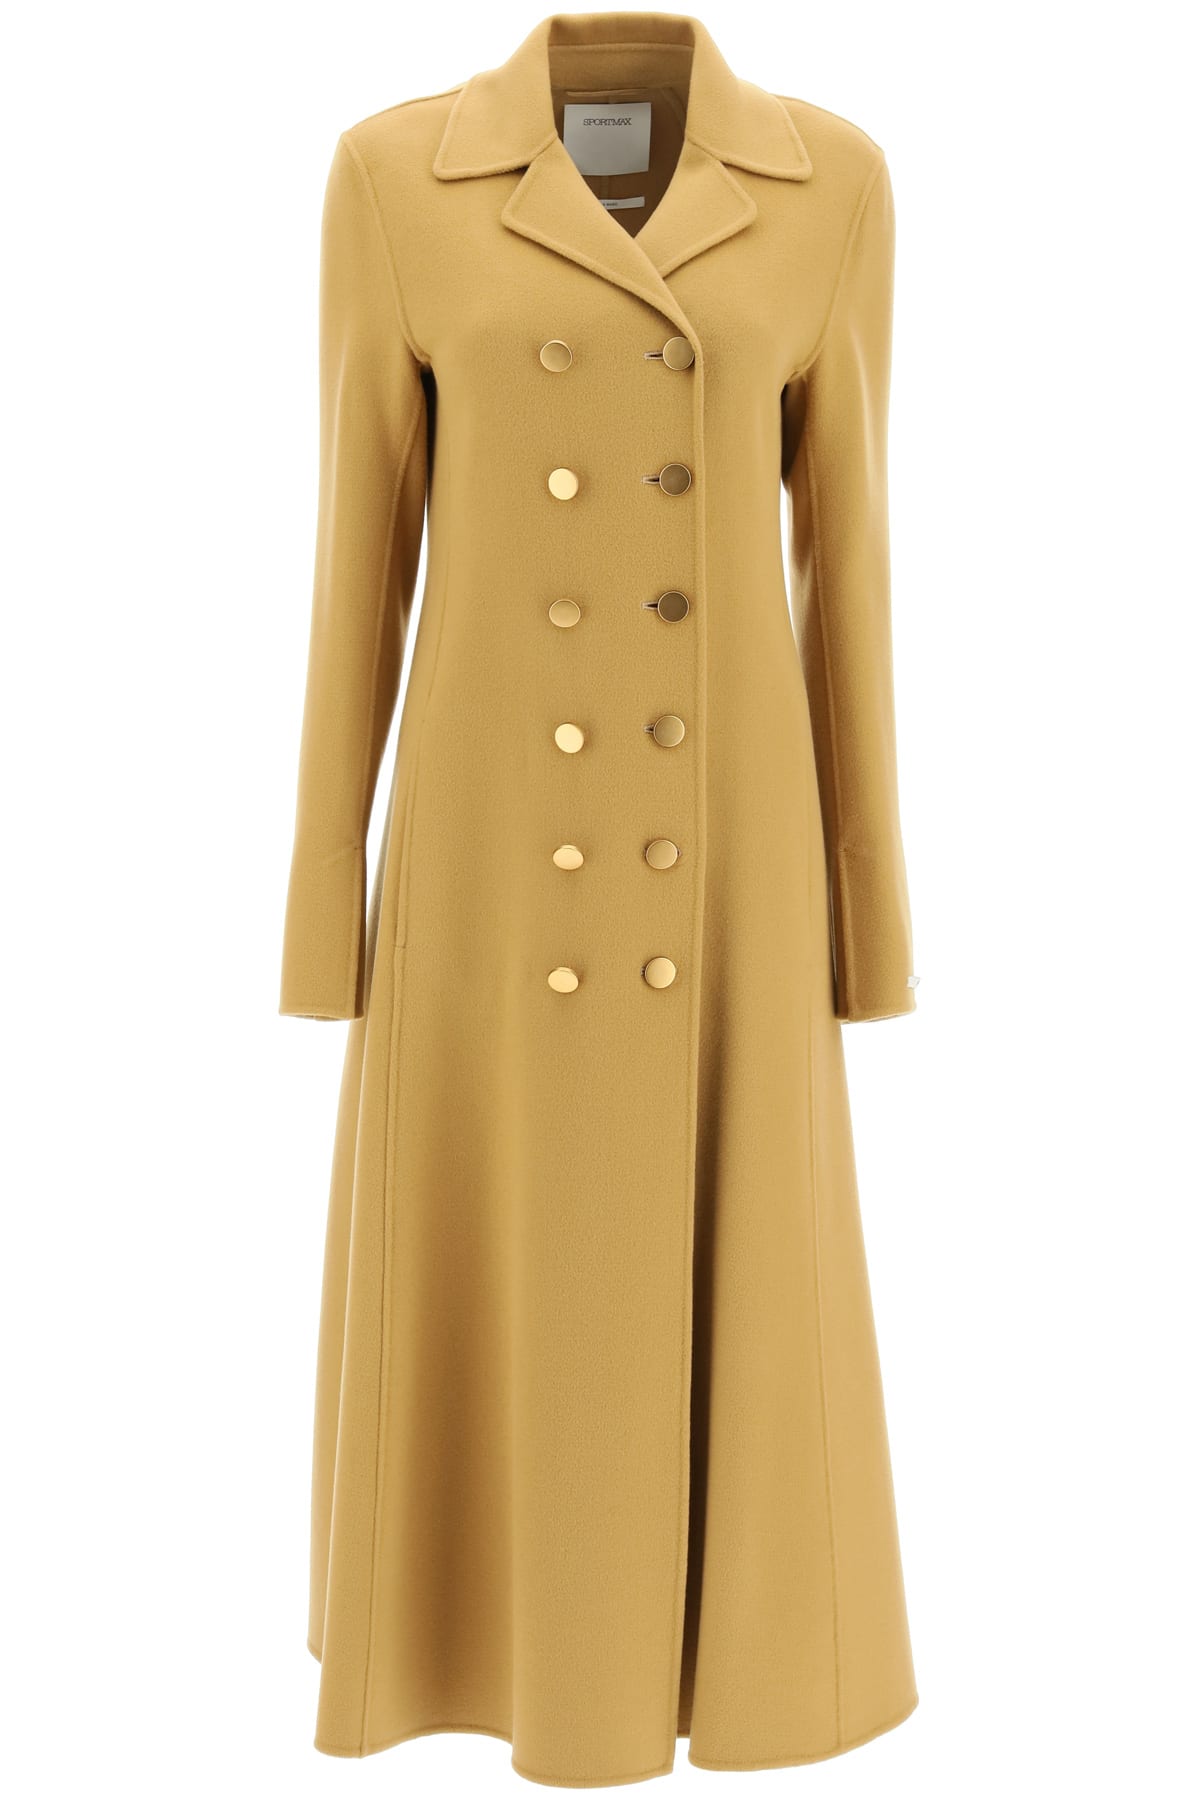 SportMax Wool And Cashmere Coat